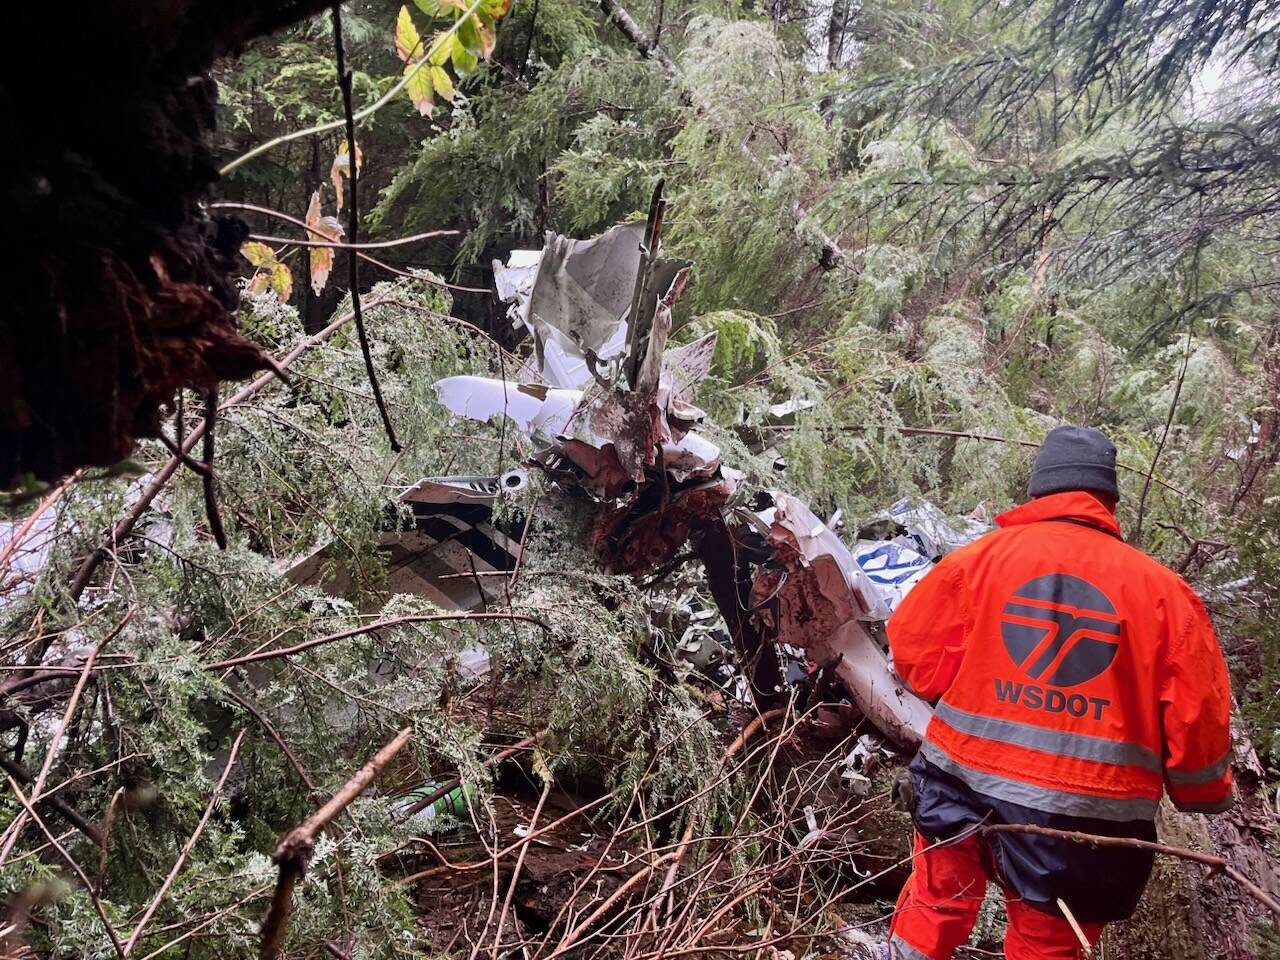 Searchers were able to locate a crashed aircraft near Queets 36 days after it went missing, according to a Washington State Department of Transportation news release. (Courtesy photo / WSDOT)